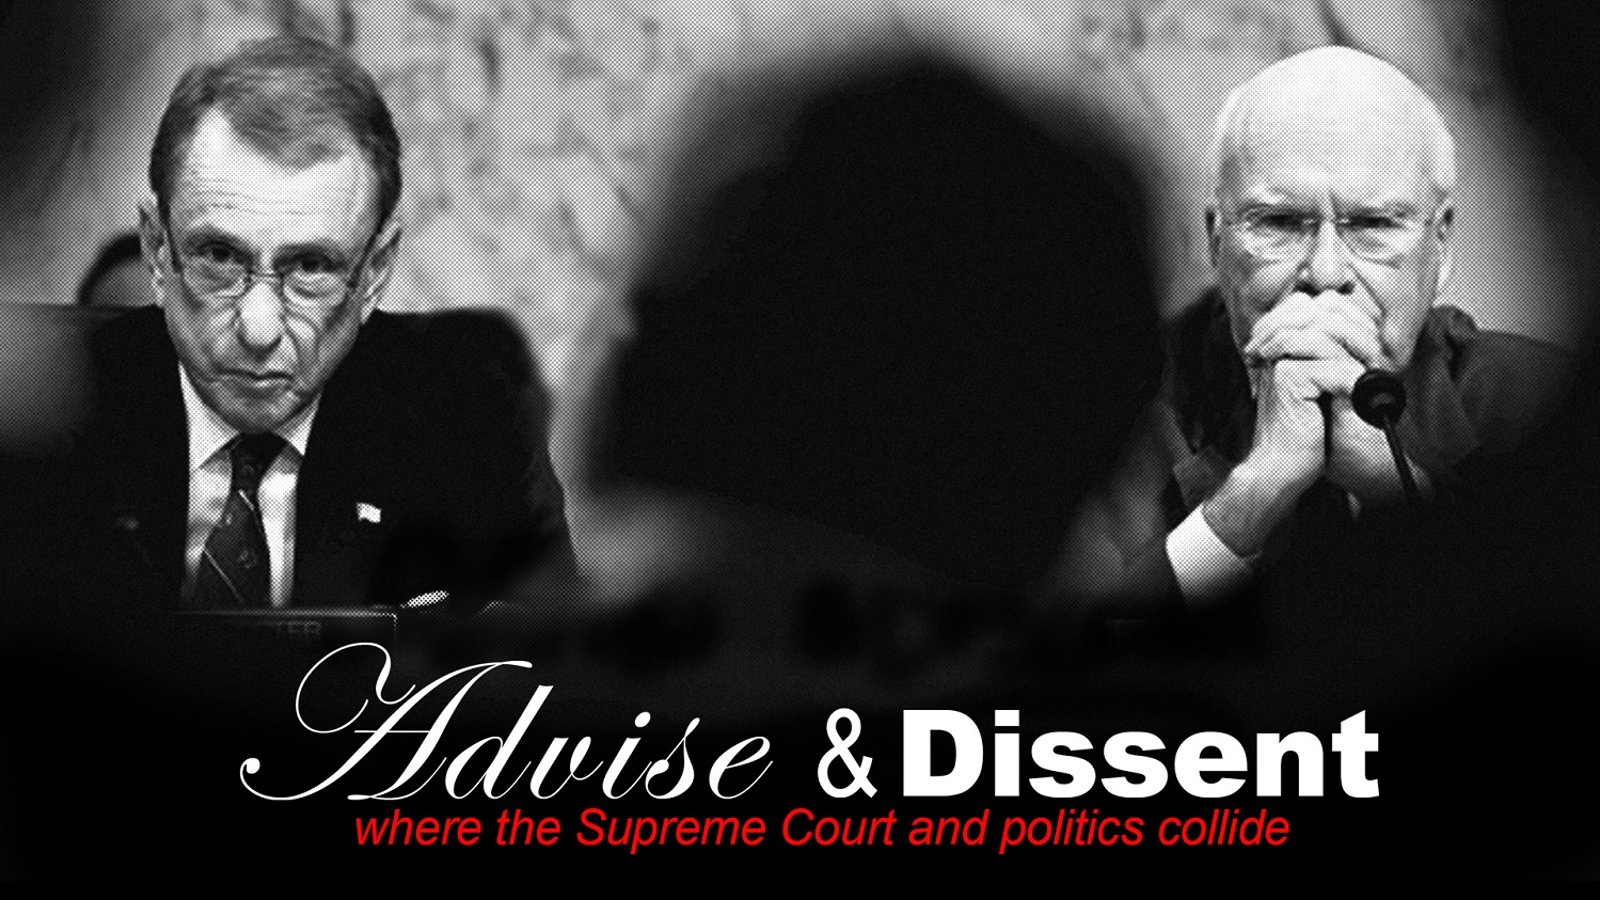 Advise & Dissent - Selecting Supreme Court Justices